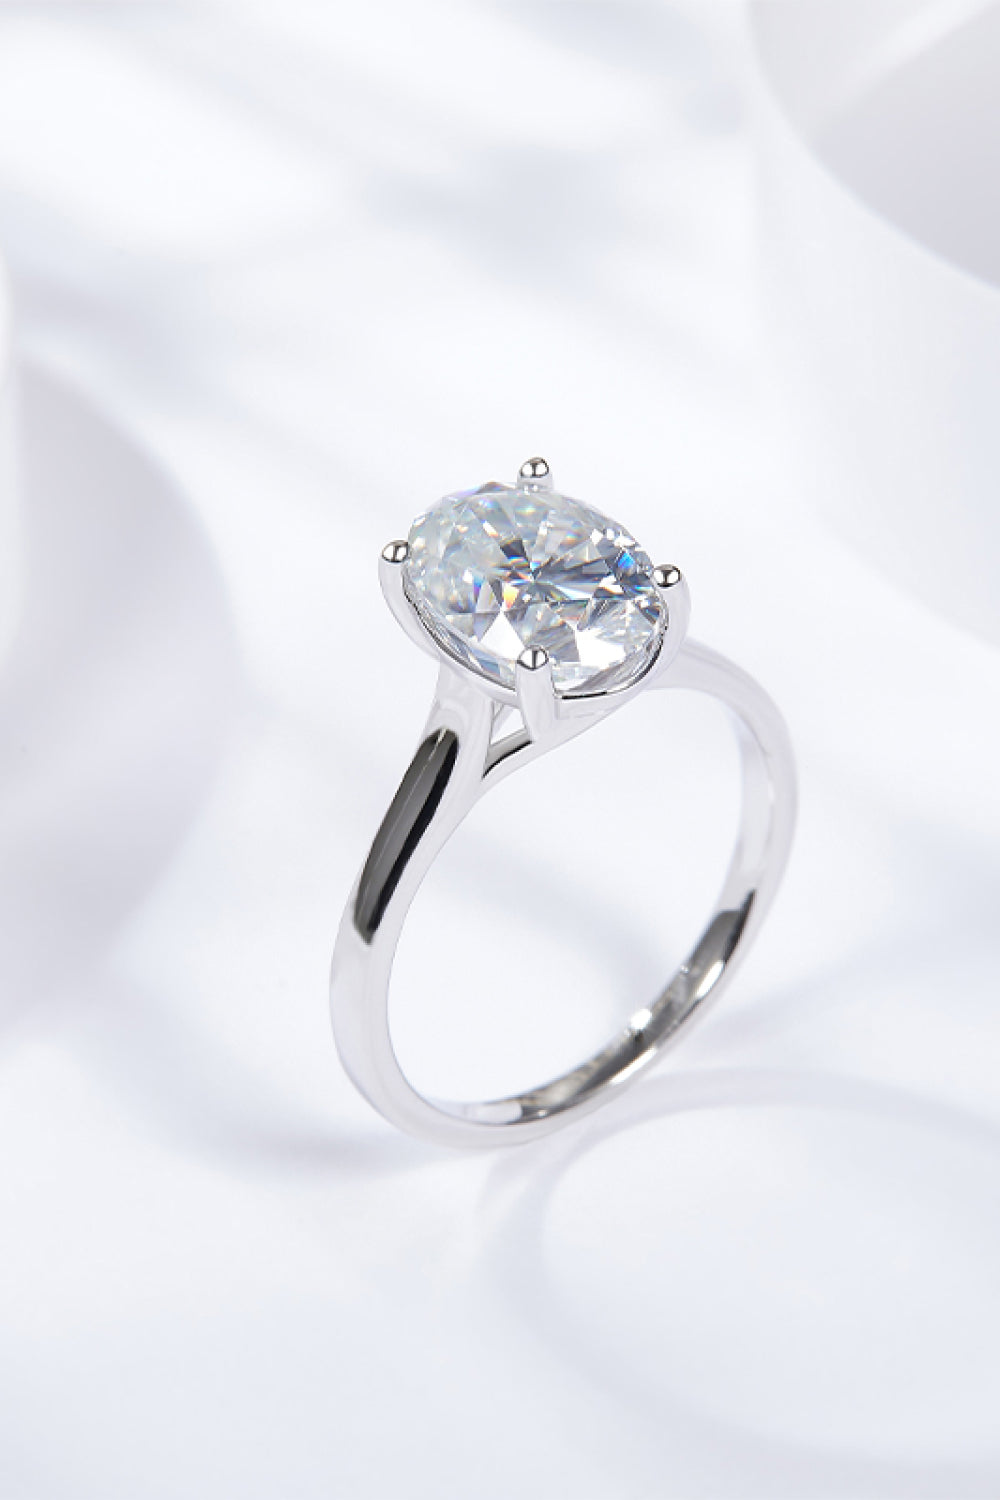 2.5 Carat Moissanite Solitaire Ring Moissanite Jewelry Brides by Emilia Milan 